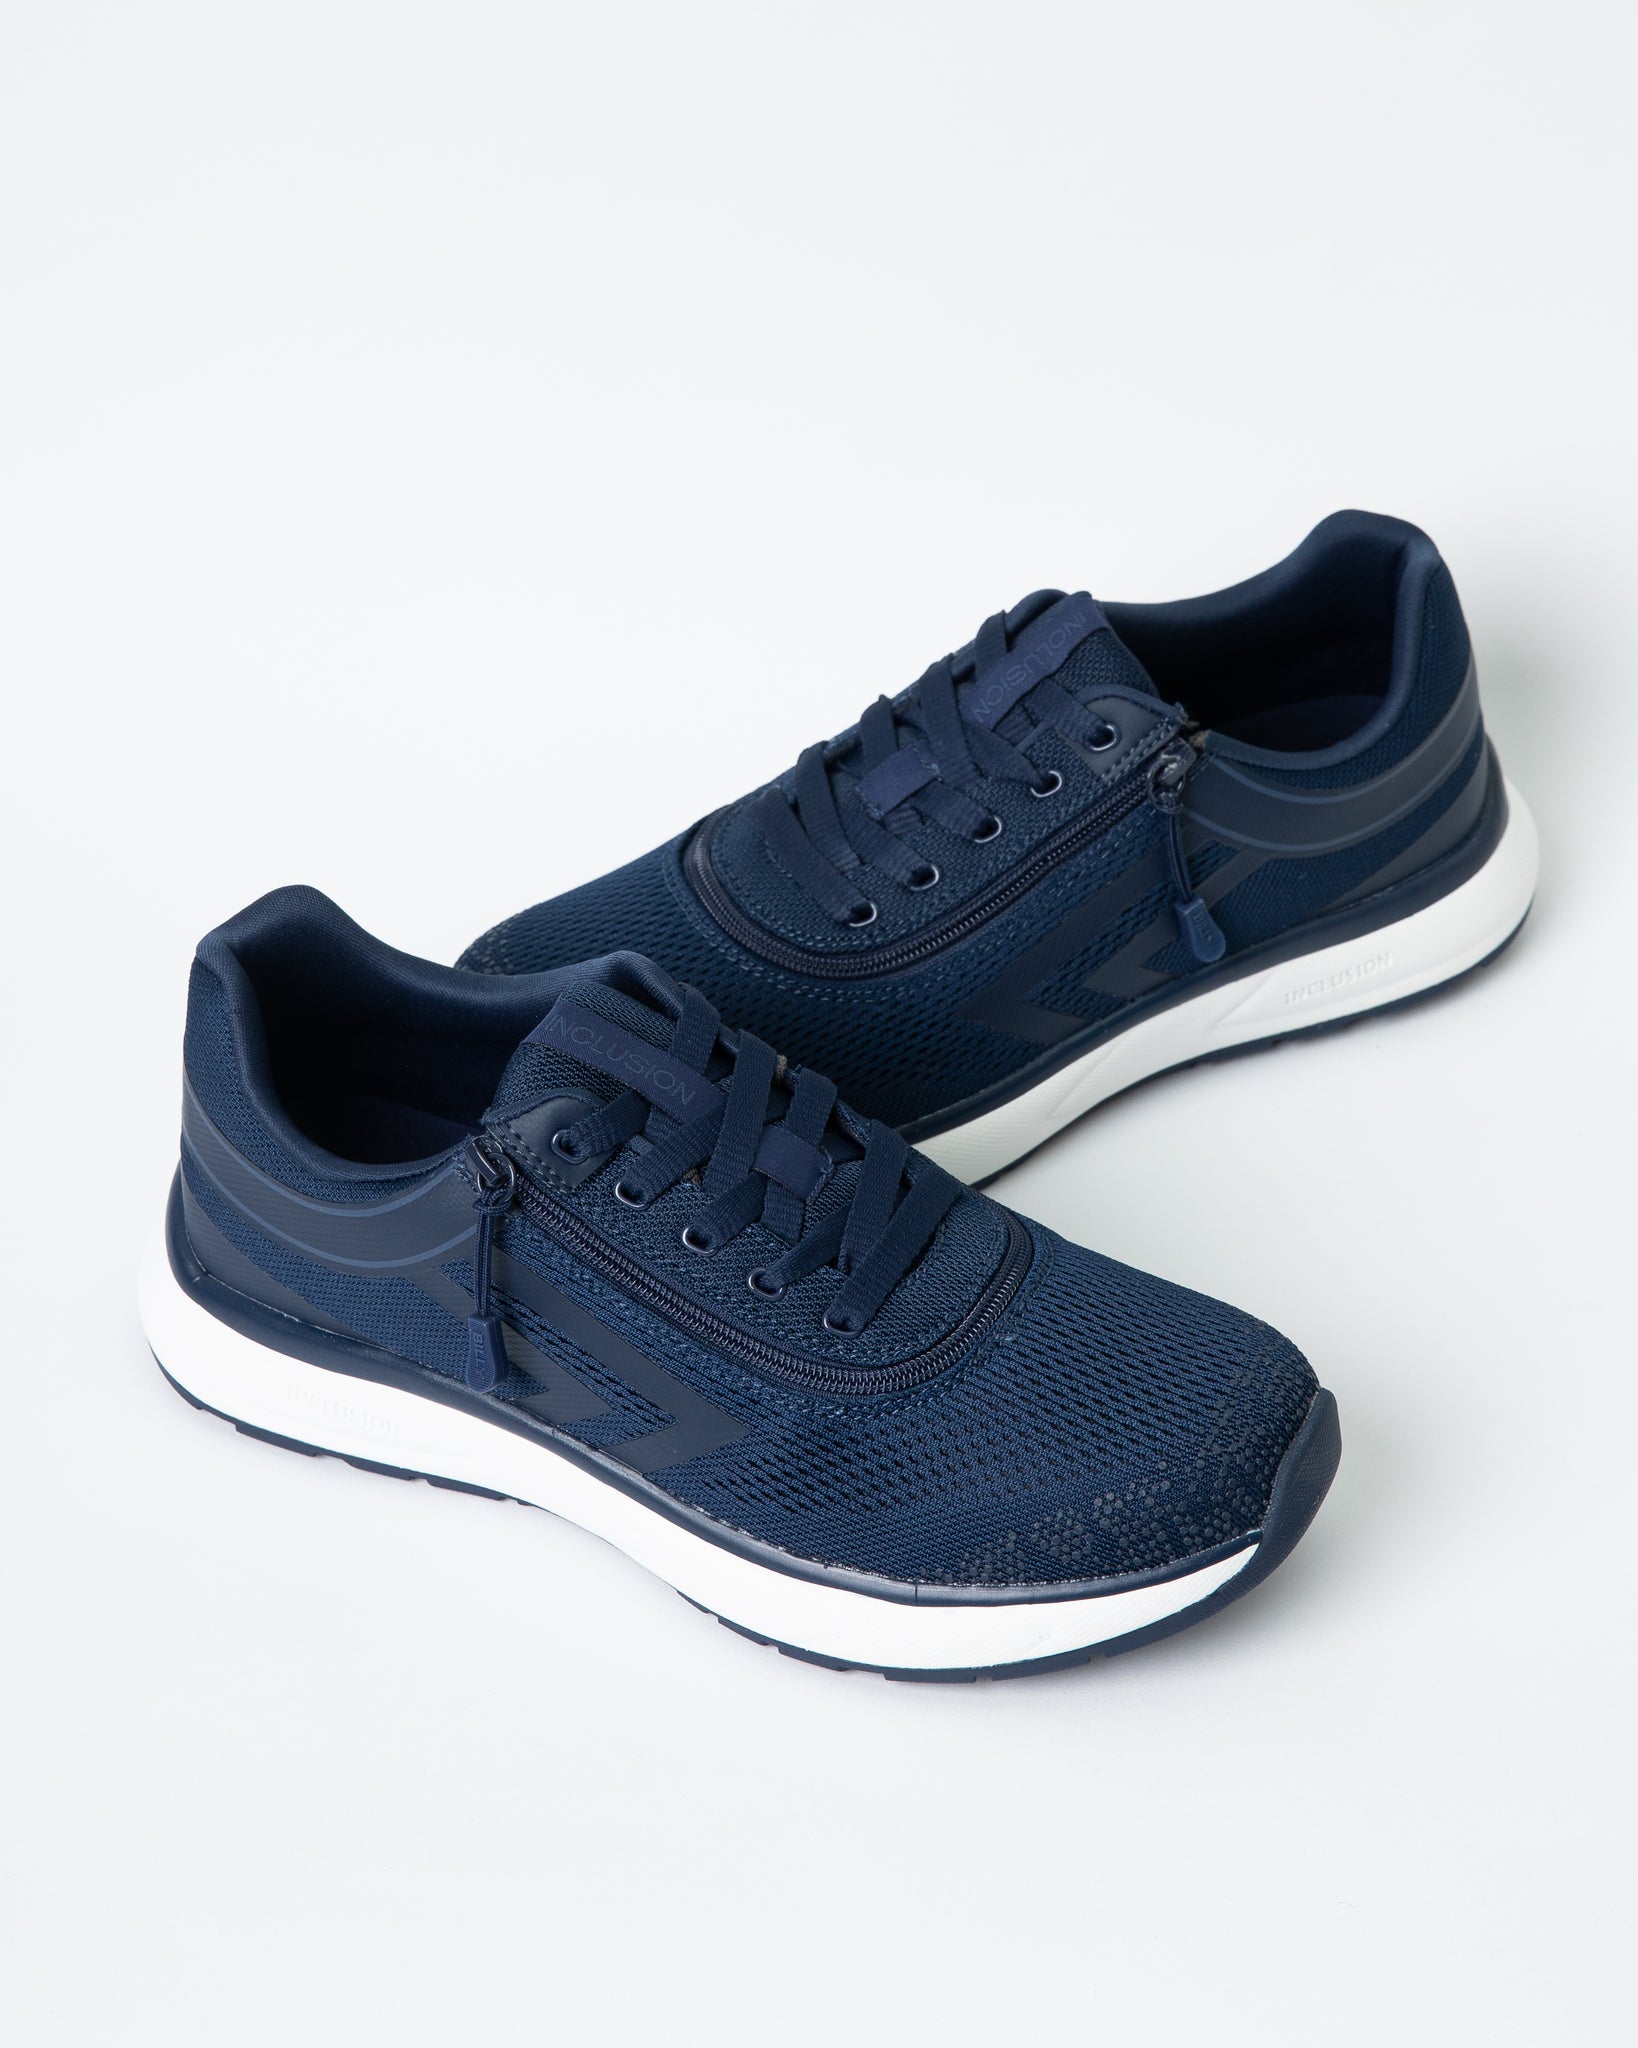 Inclusion Too (Mens) - Navy